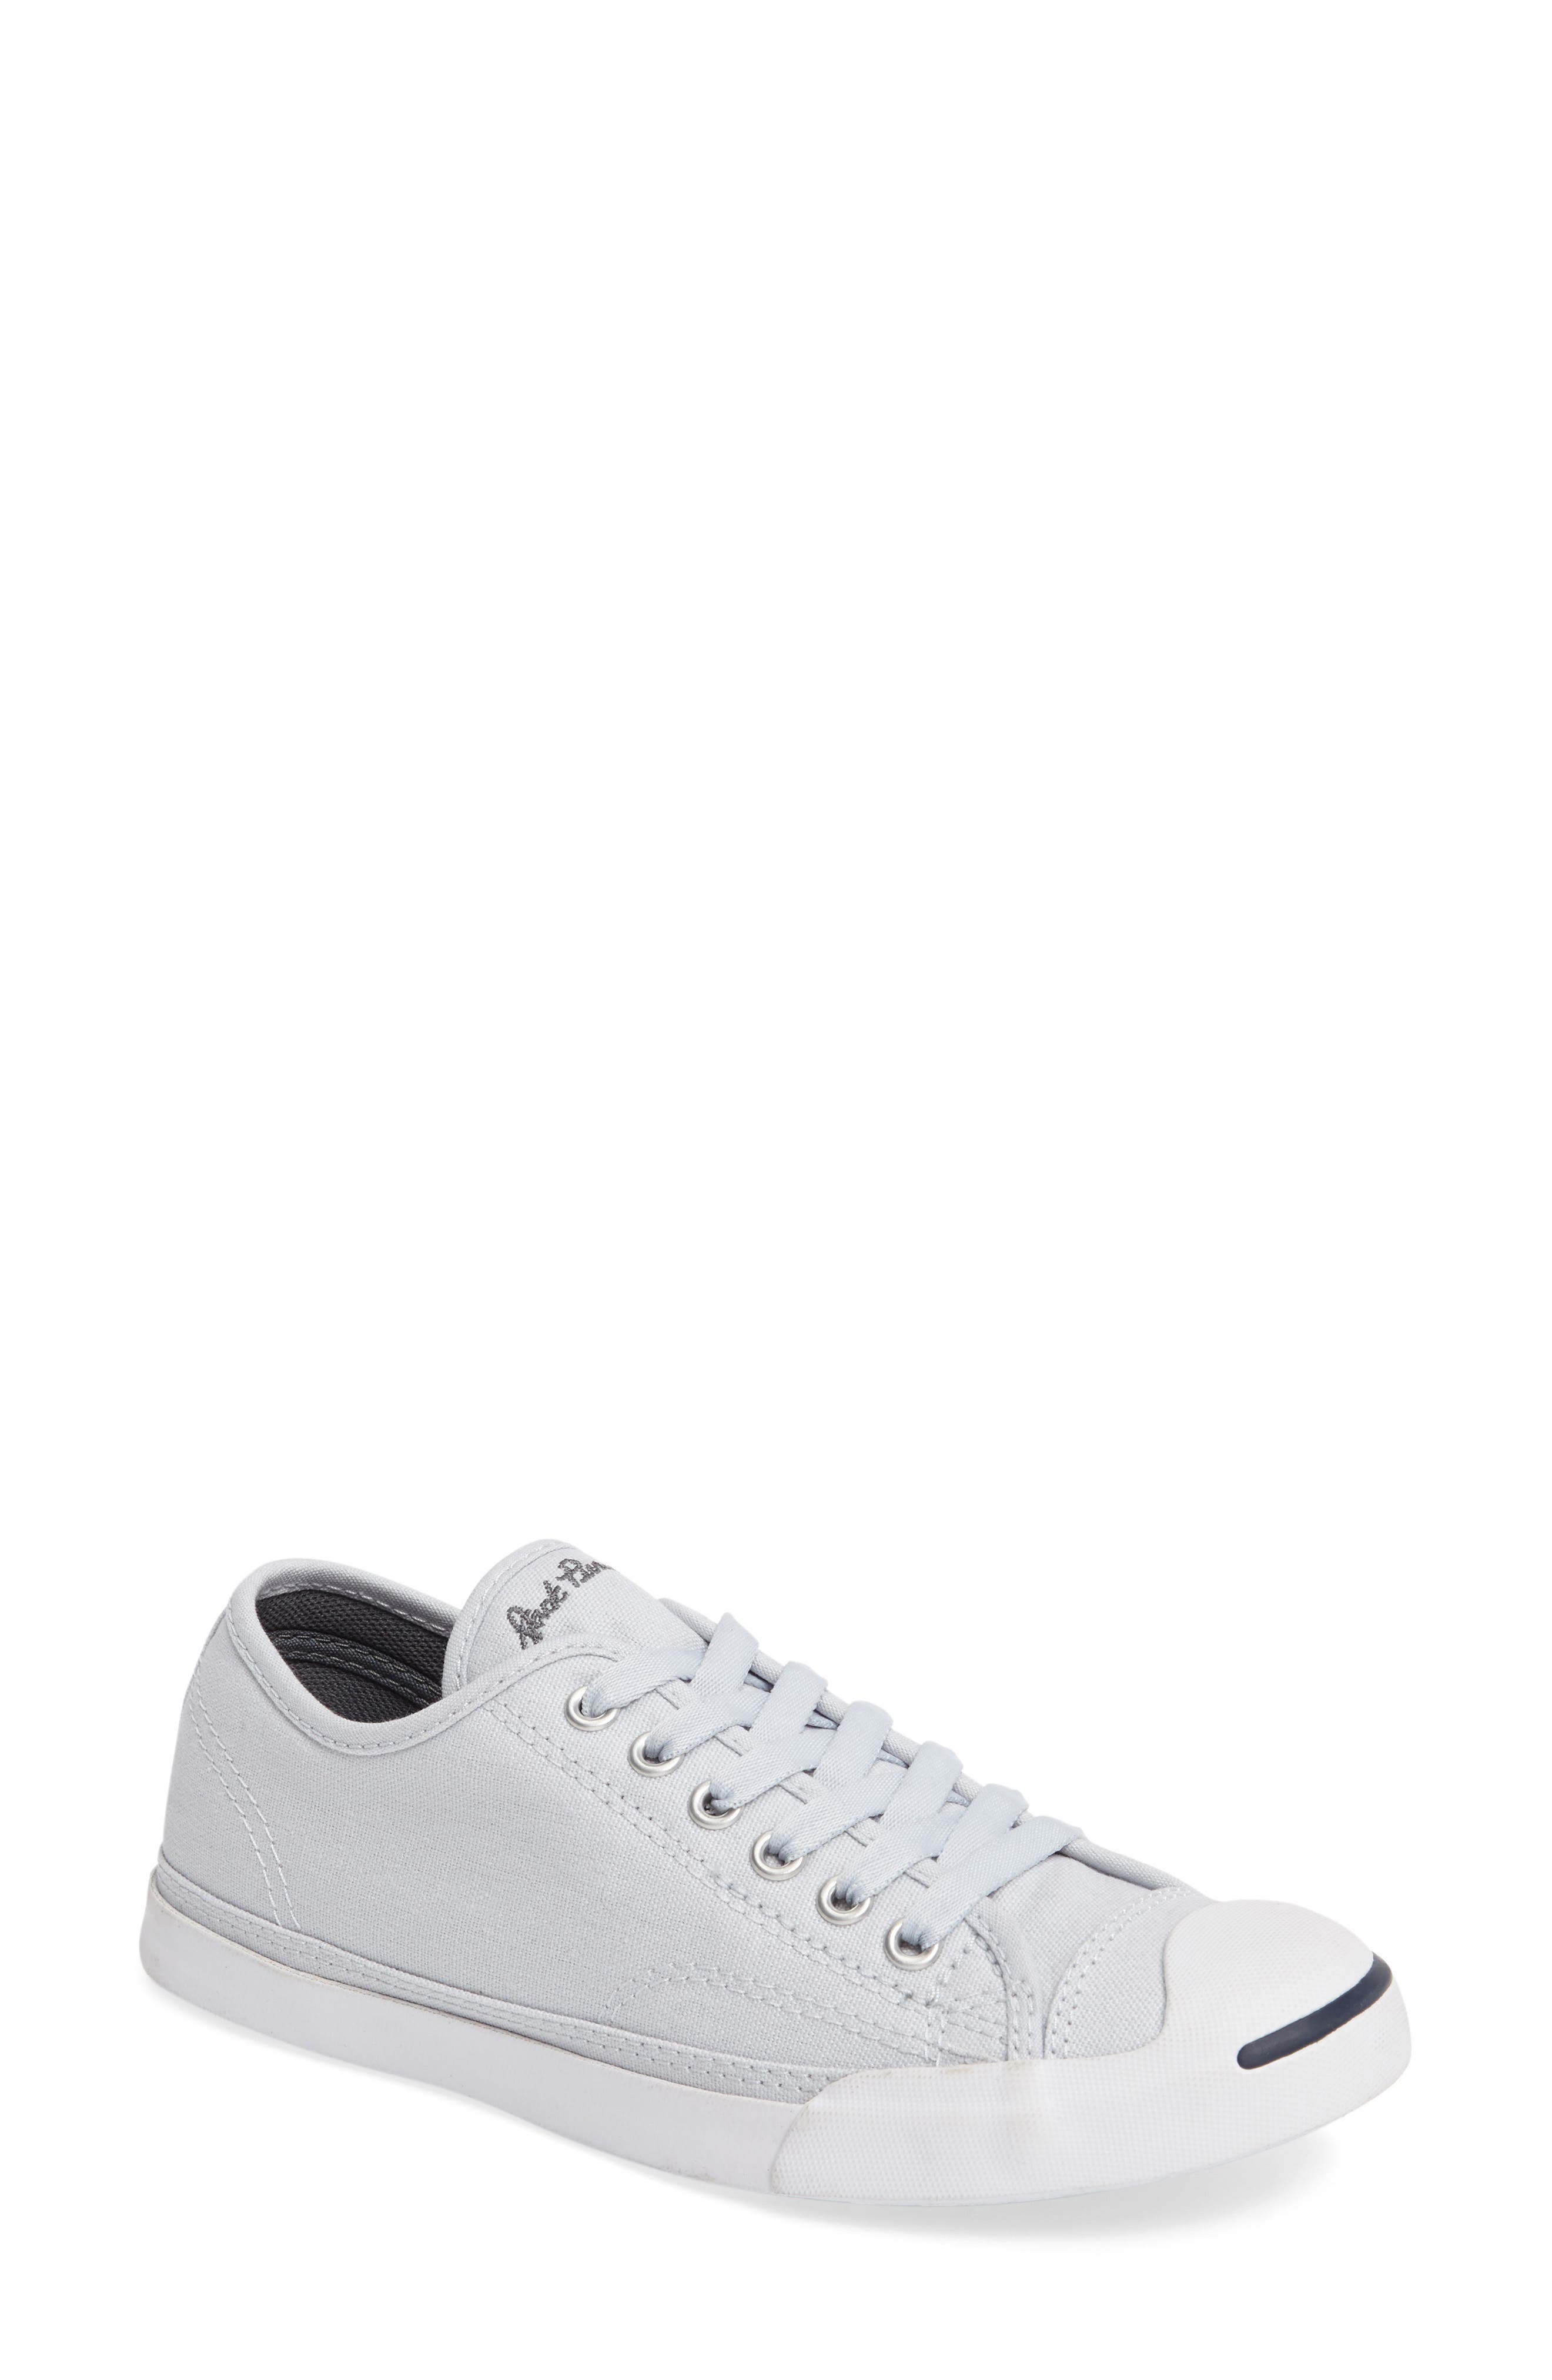 Converse | Jack Purcell Signature Ox 